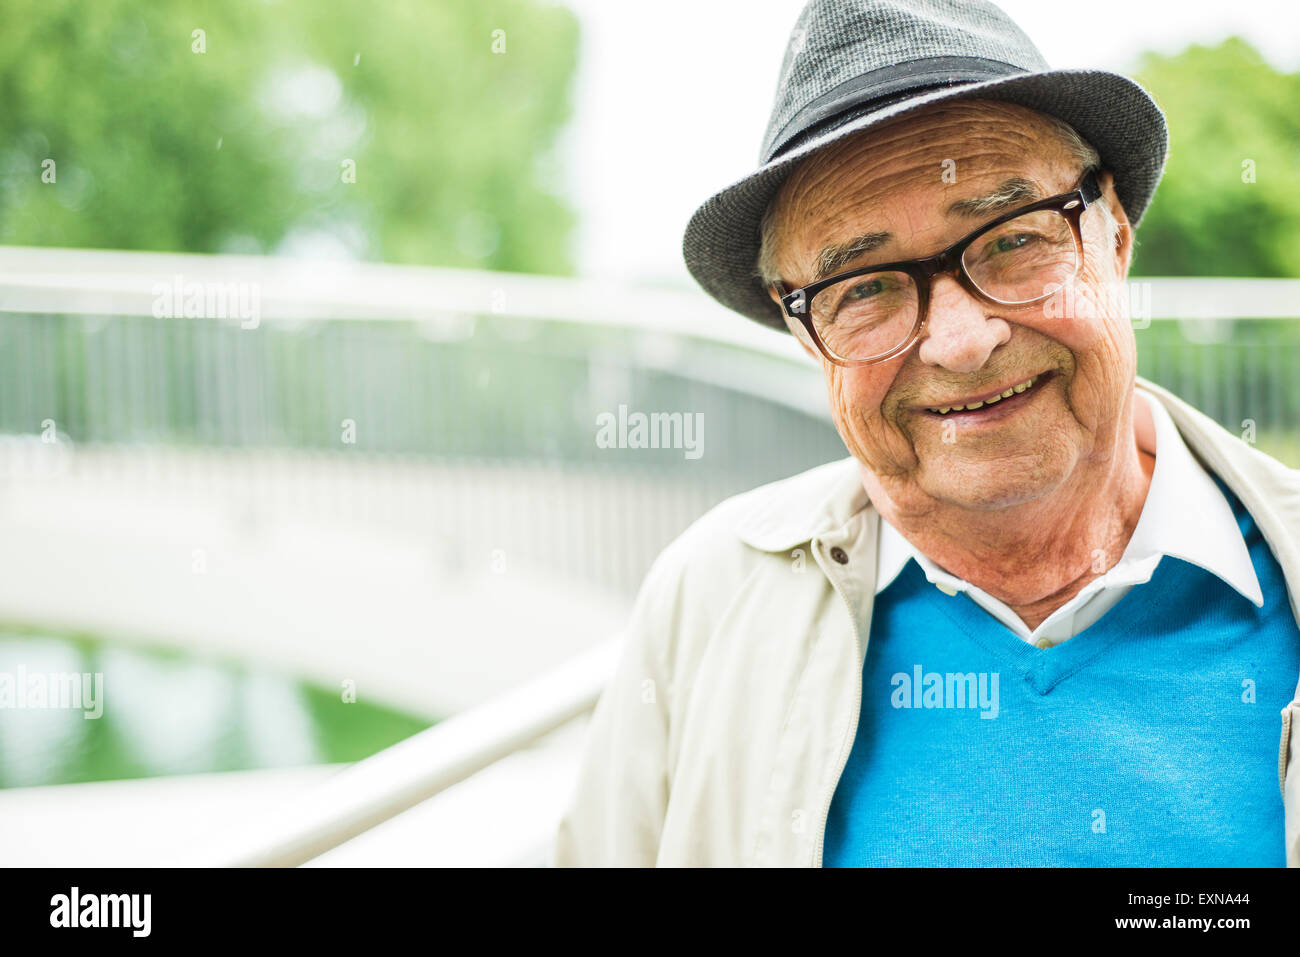 Portrait of smiling senior man wearing glasses ans and hat Stock Photo